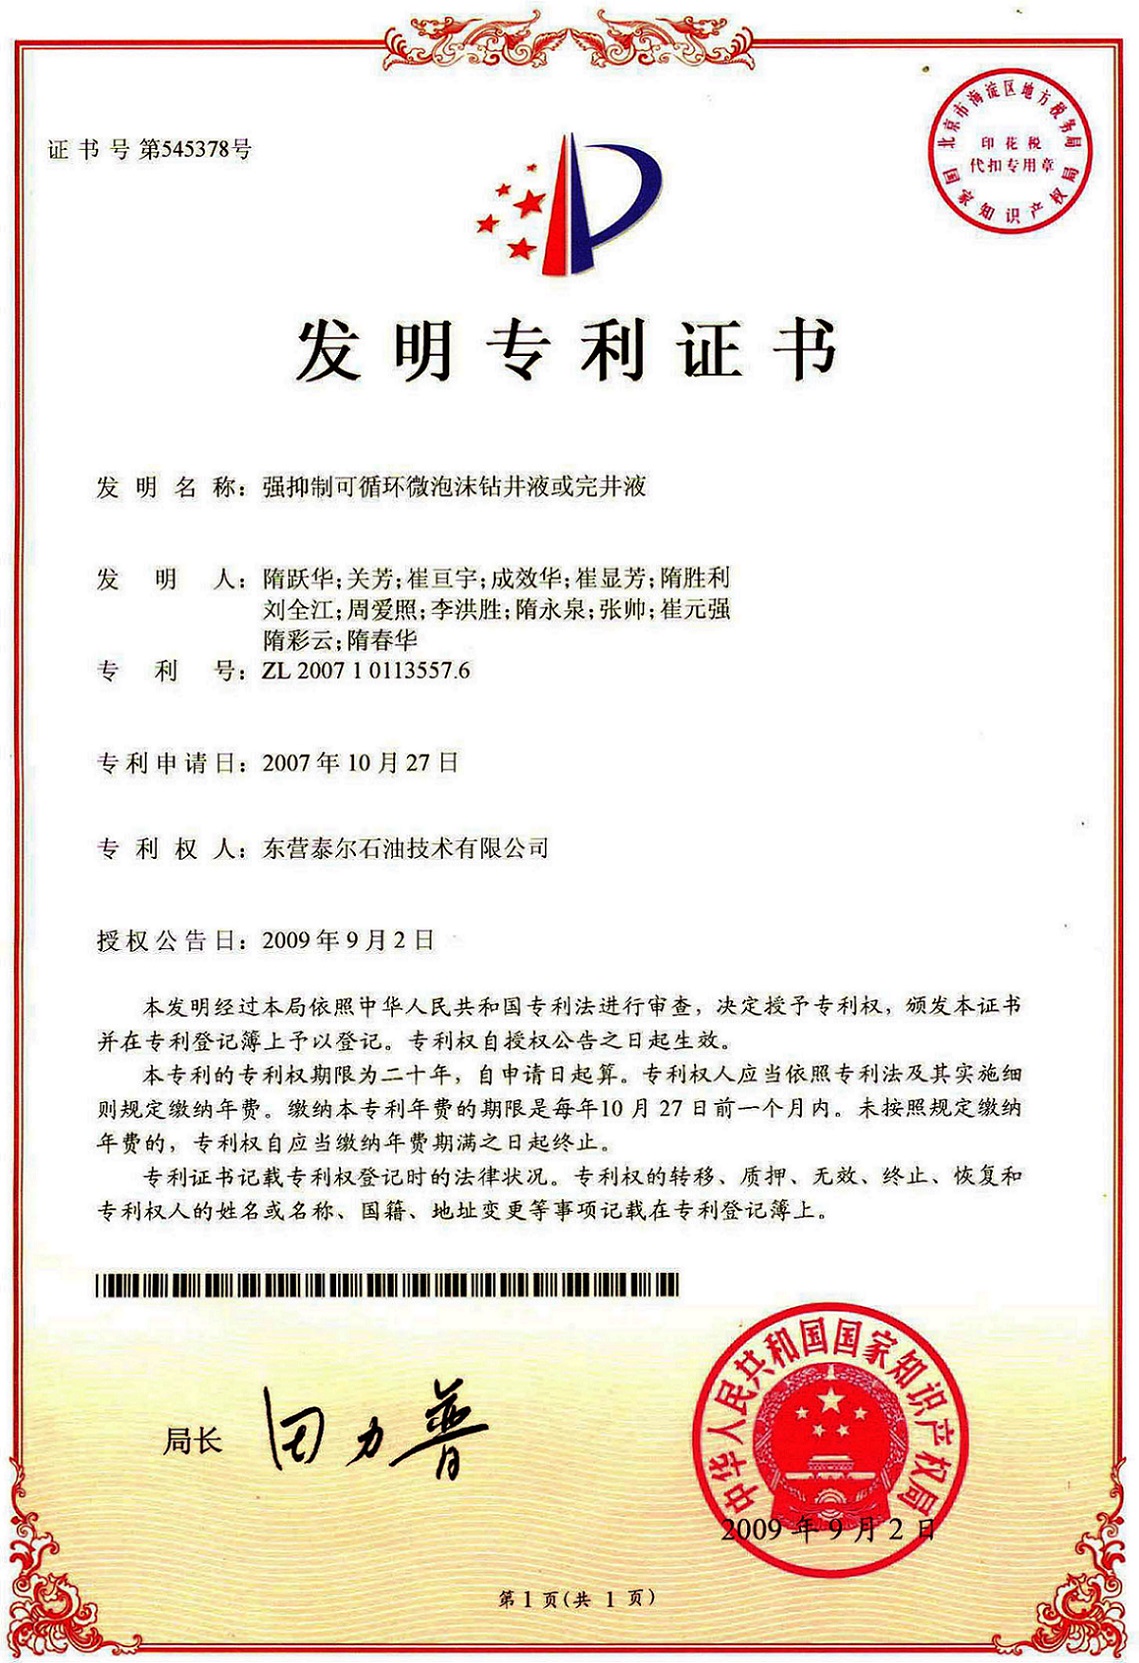 The company patent won the first prize of Dongying's first high value patent review